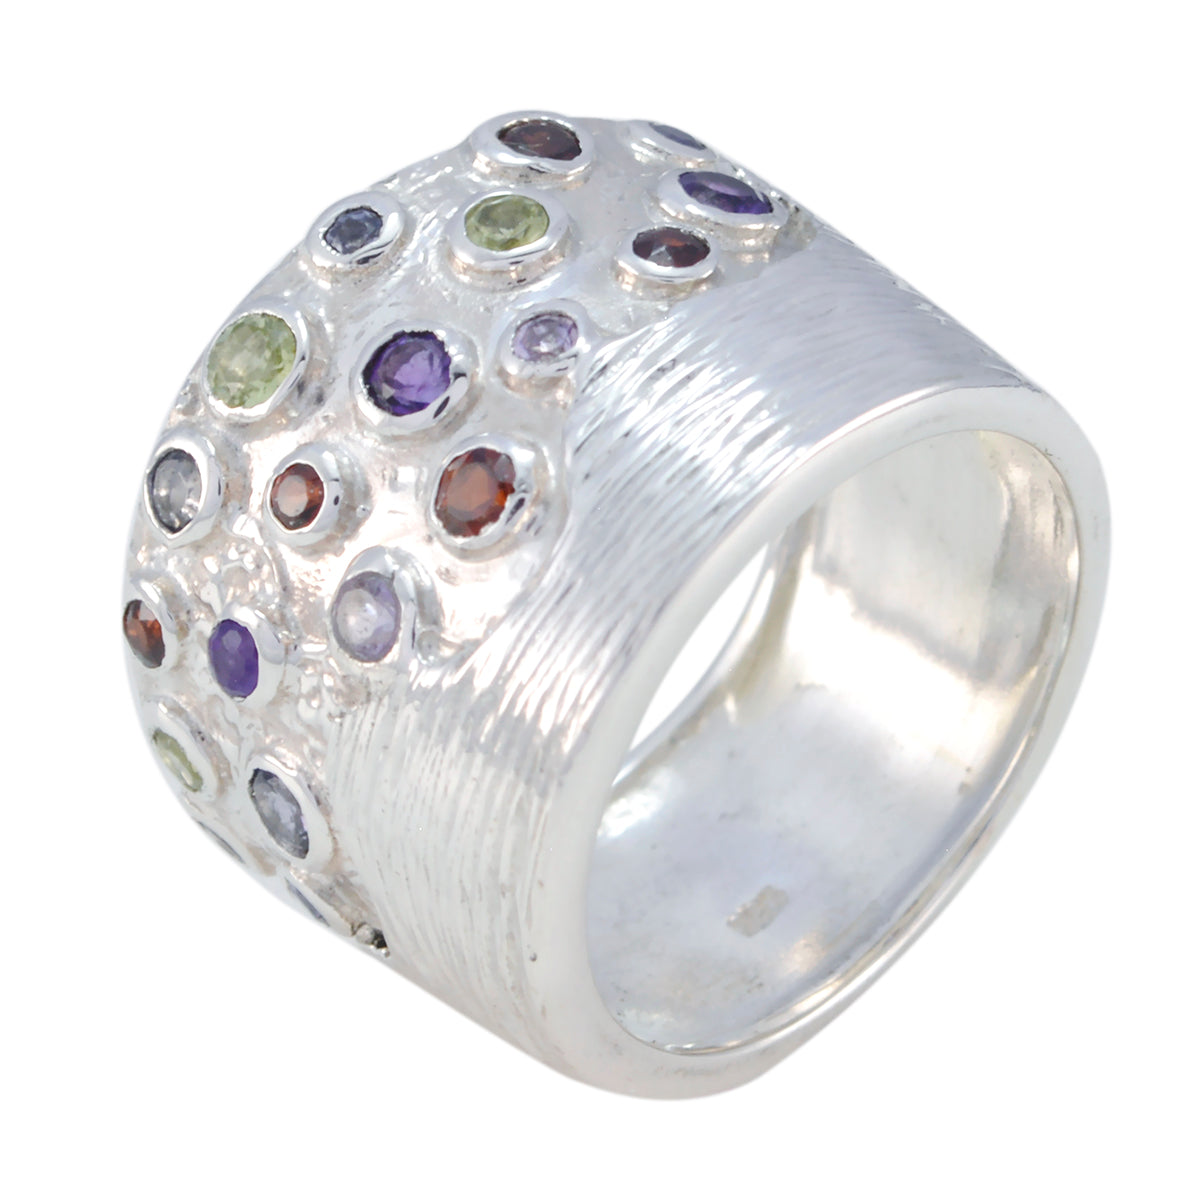 Handcrafted Gemstones Multi Stone Solid Silver Rings Bedazzled Jewelry